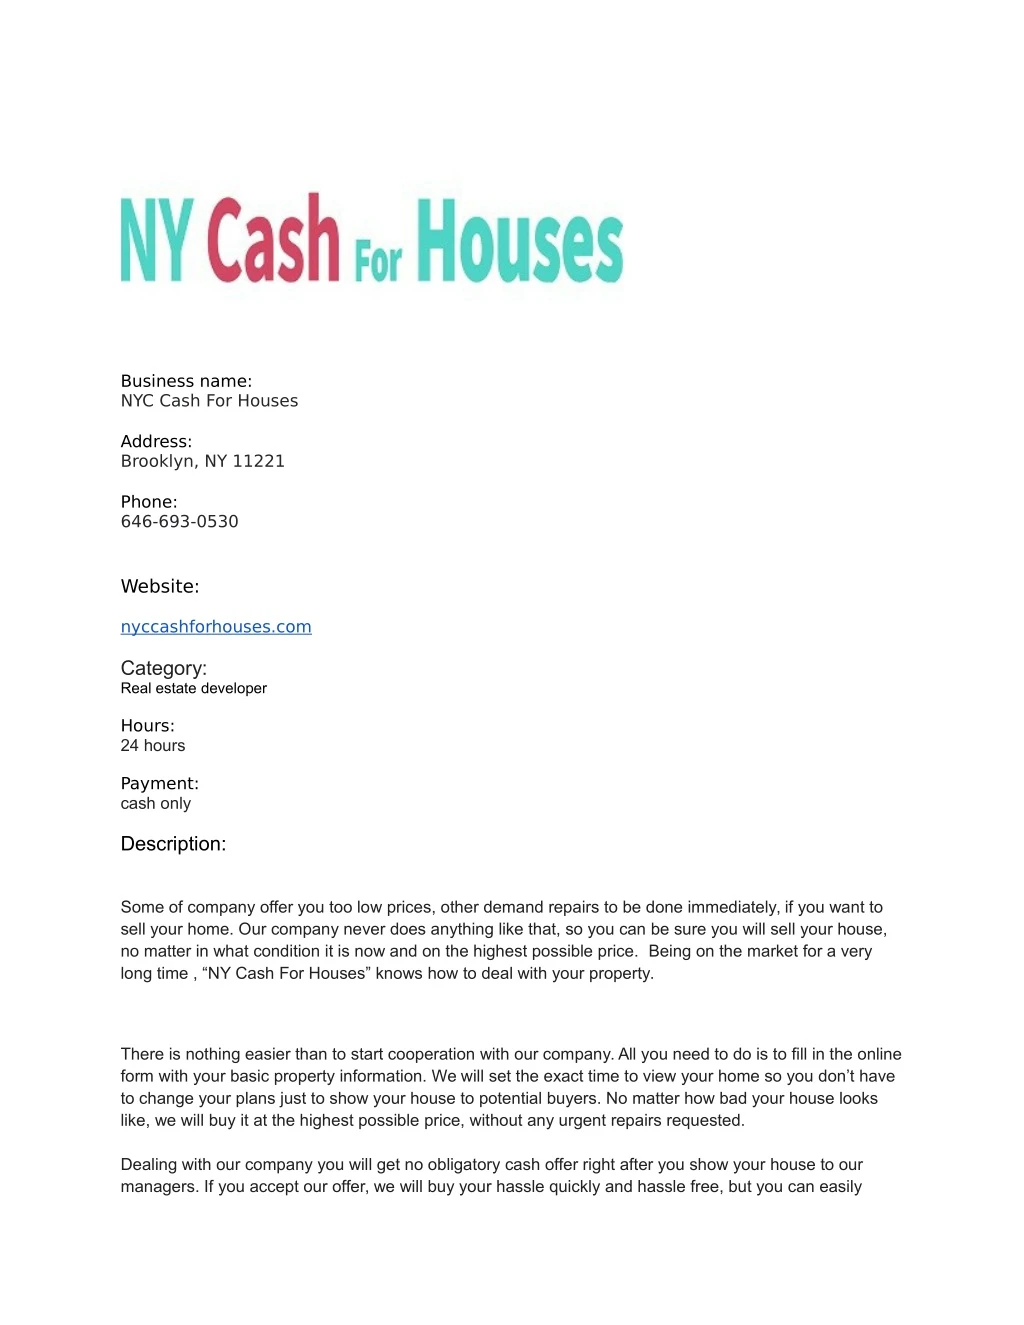 business name nyc cash for houses